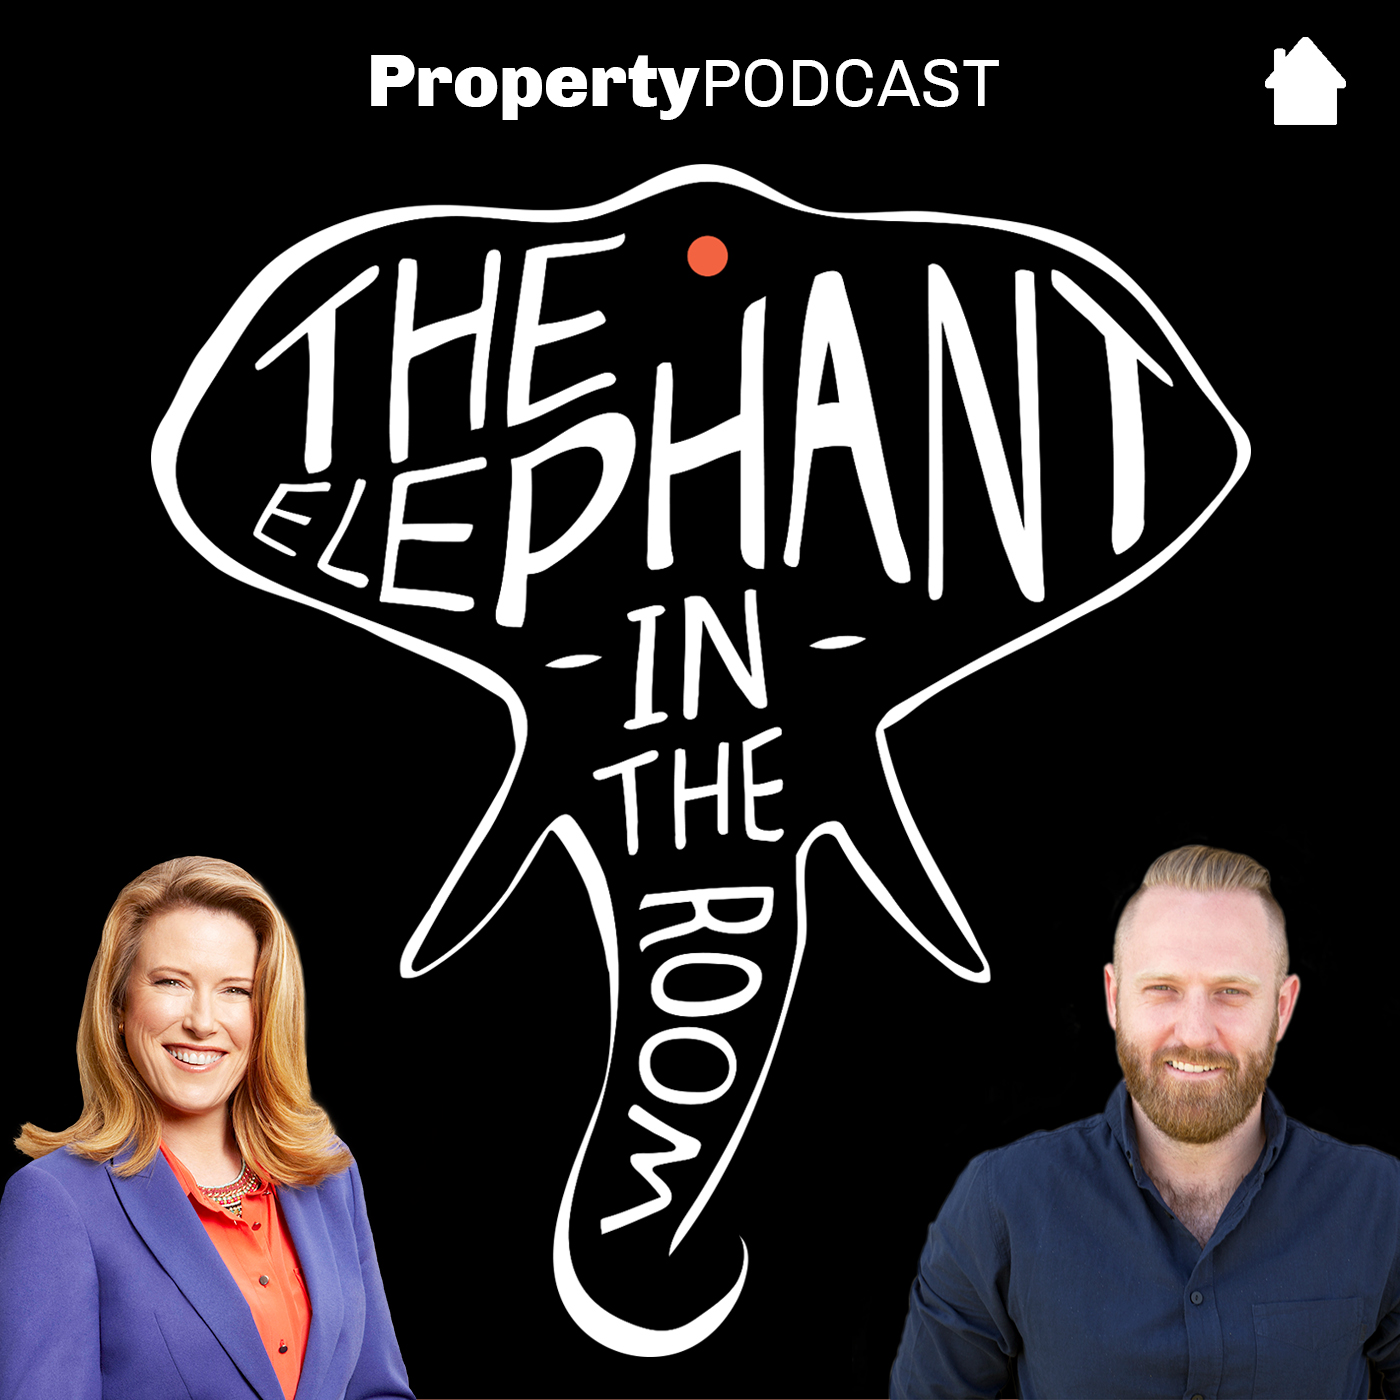 Host Special | Listener Q&A: How to buy your first investment property